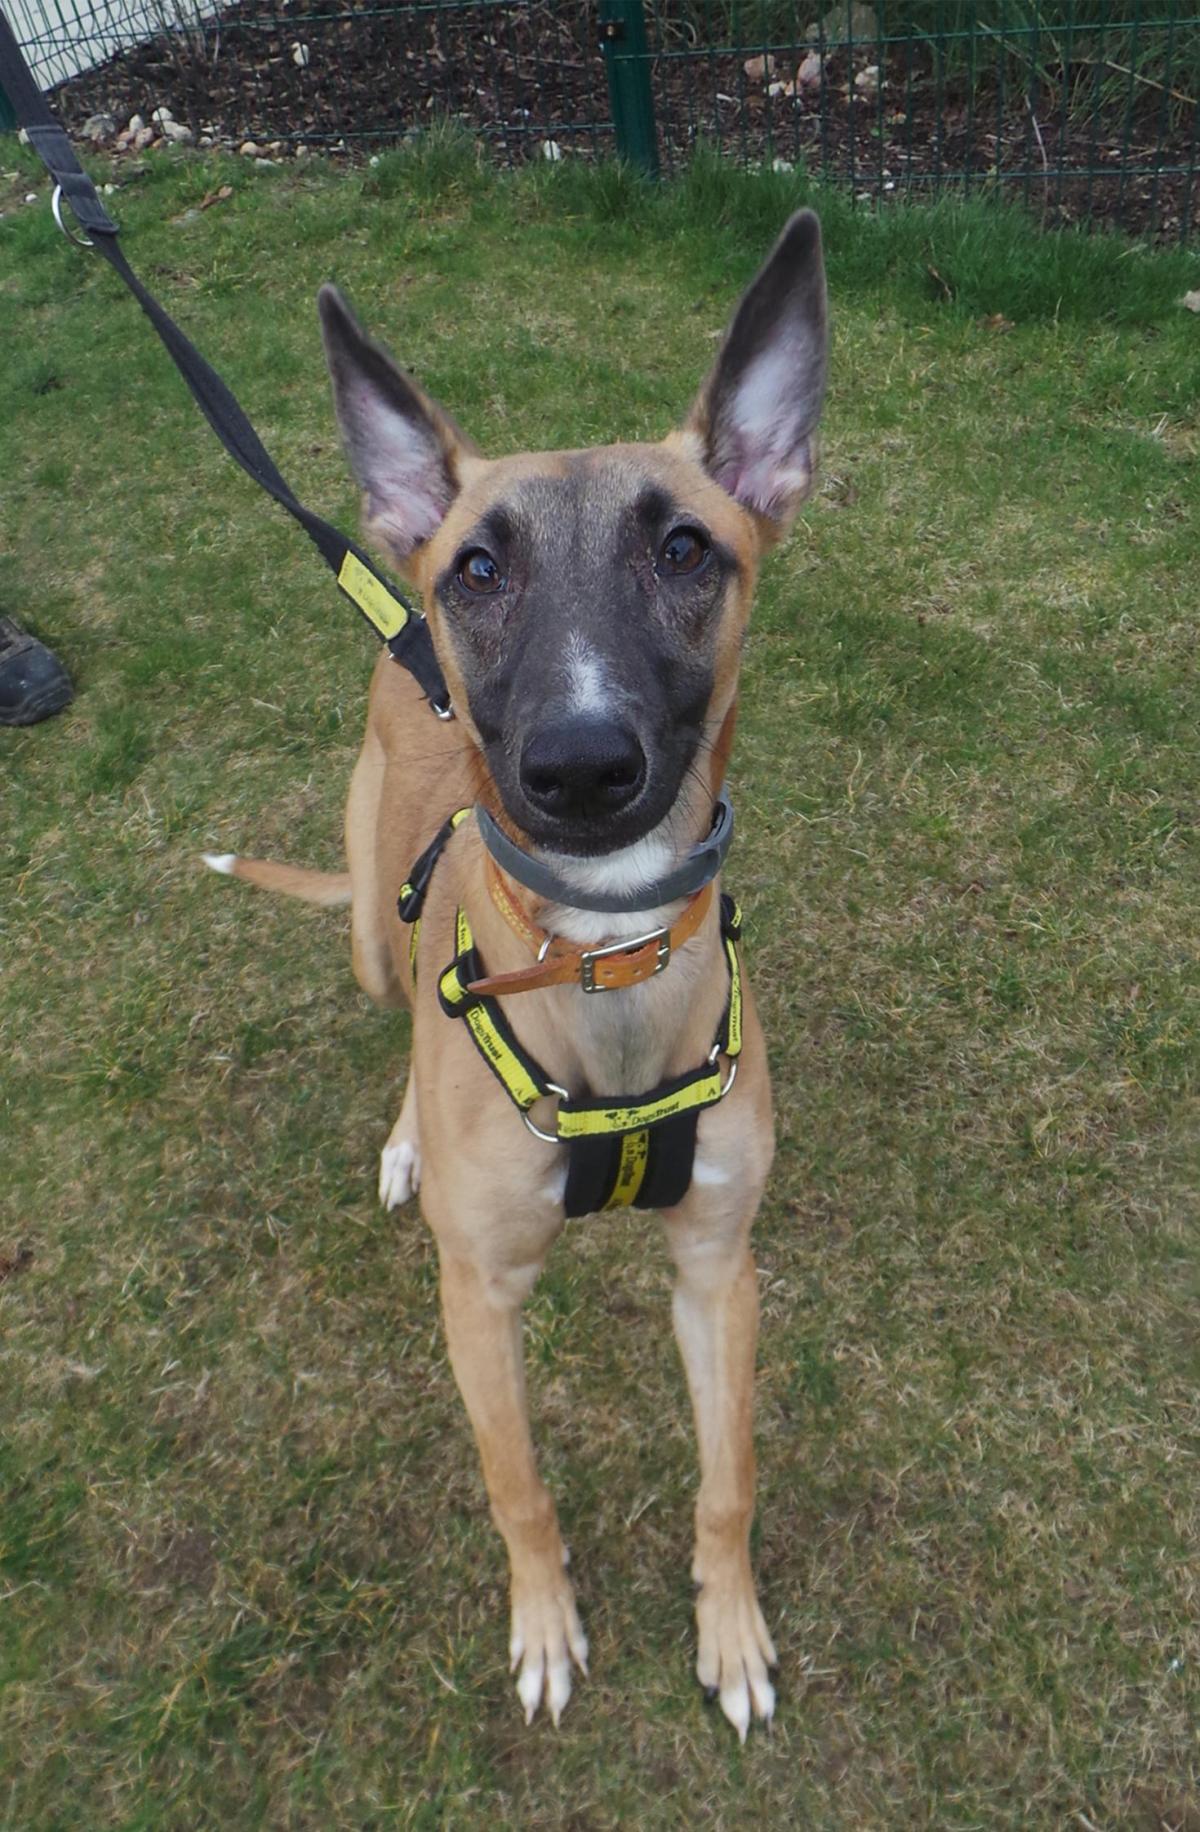 20/03/15 Tinkerbell is a six month old leggy female Lurcher. Tinkerbell needs a home with company all of the time to begin with as she is still a baby. She can live with adults, children over the age of eight years old and other calm dogs